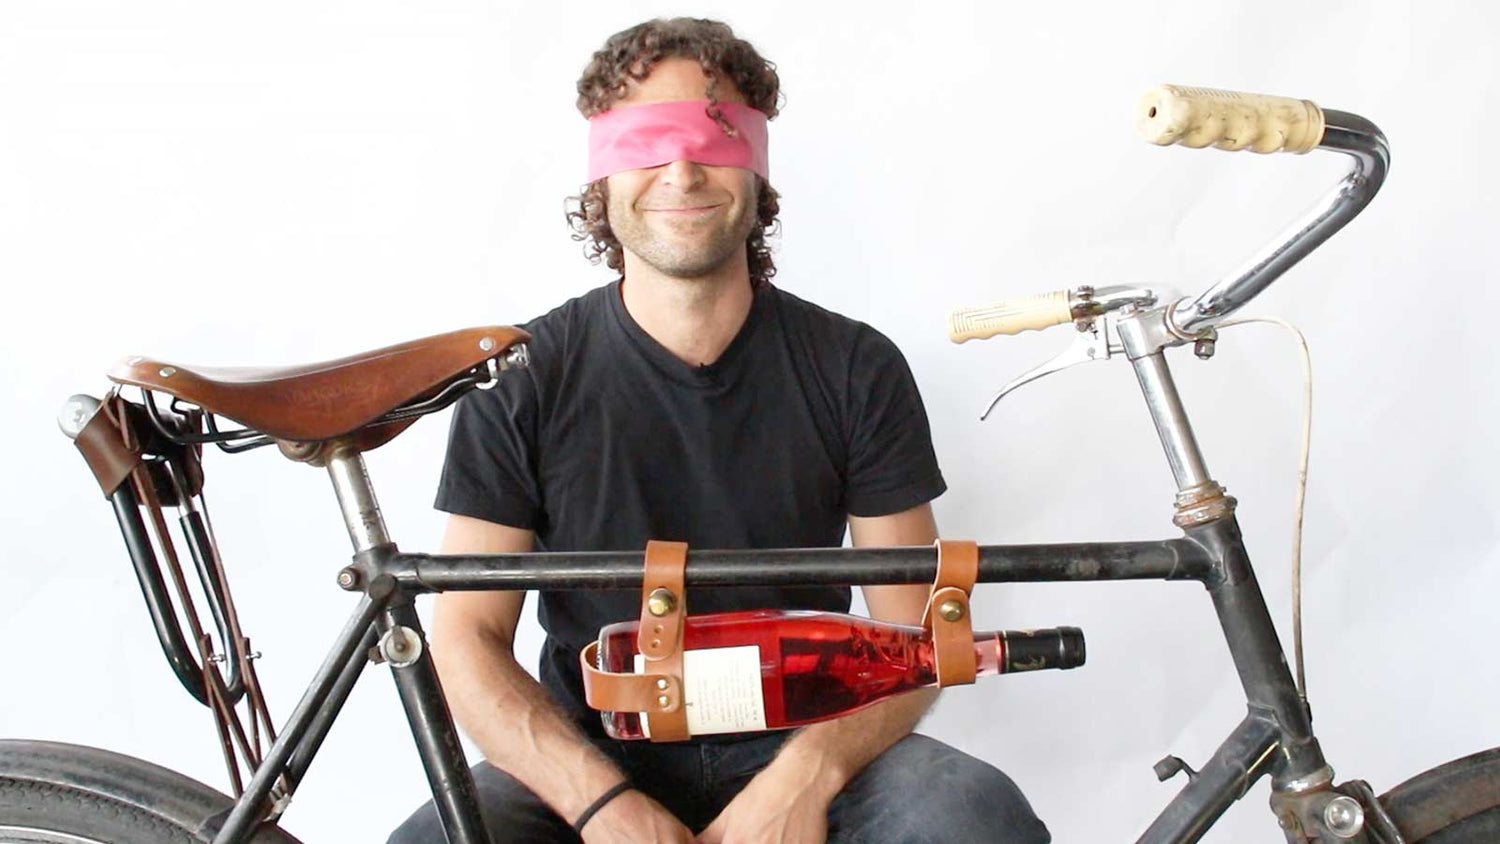 Bicycle Wine Rack: How-To's